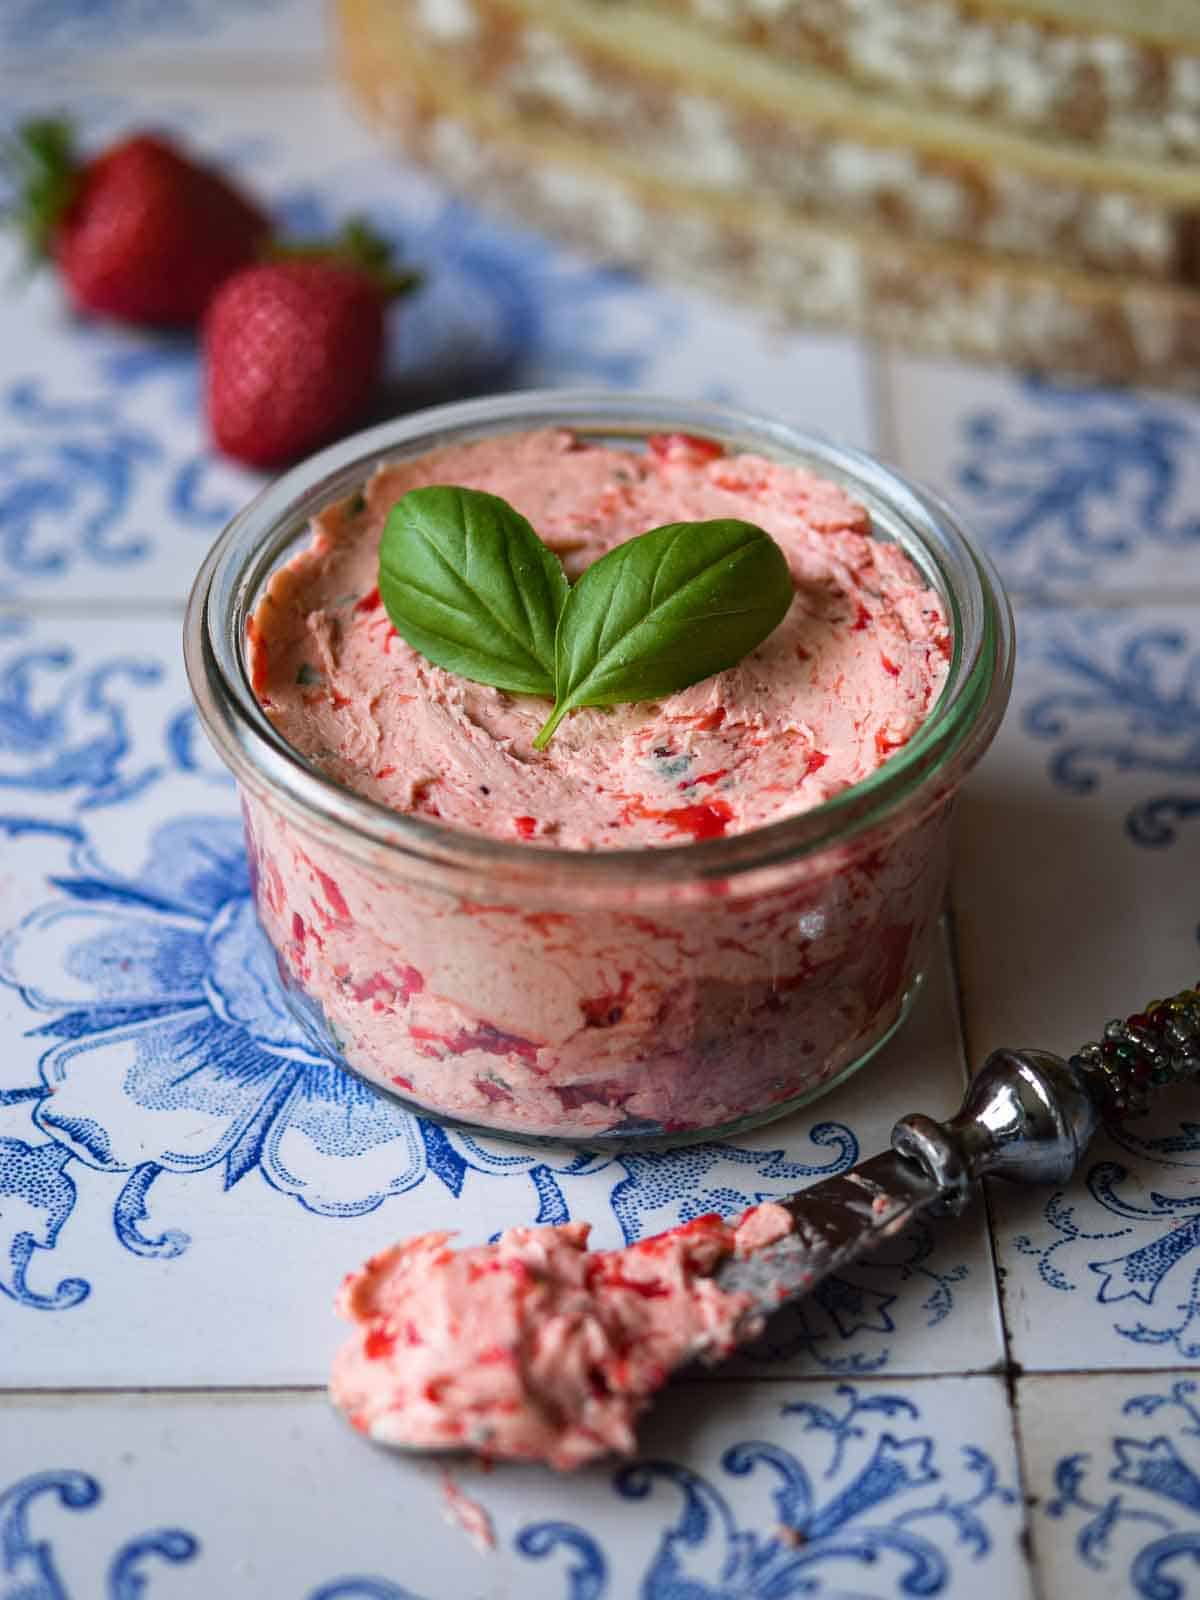 Whipped strawberry basil butter in a glass jar on a tile background.